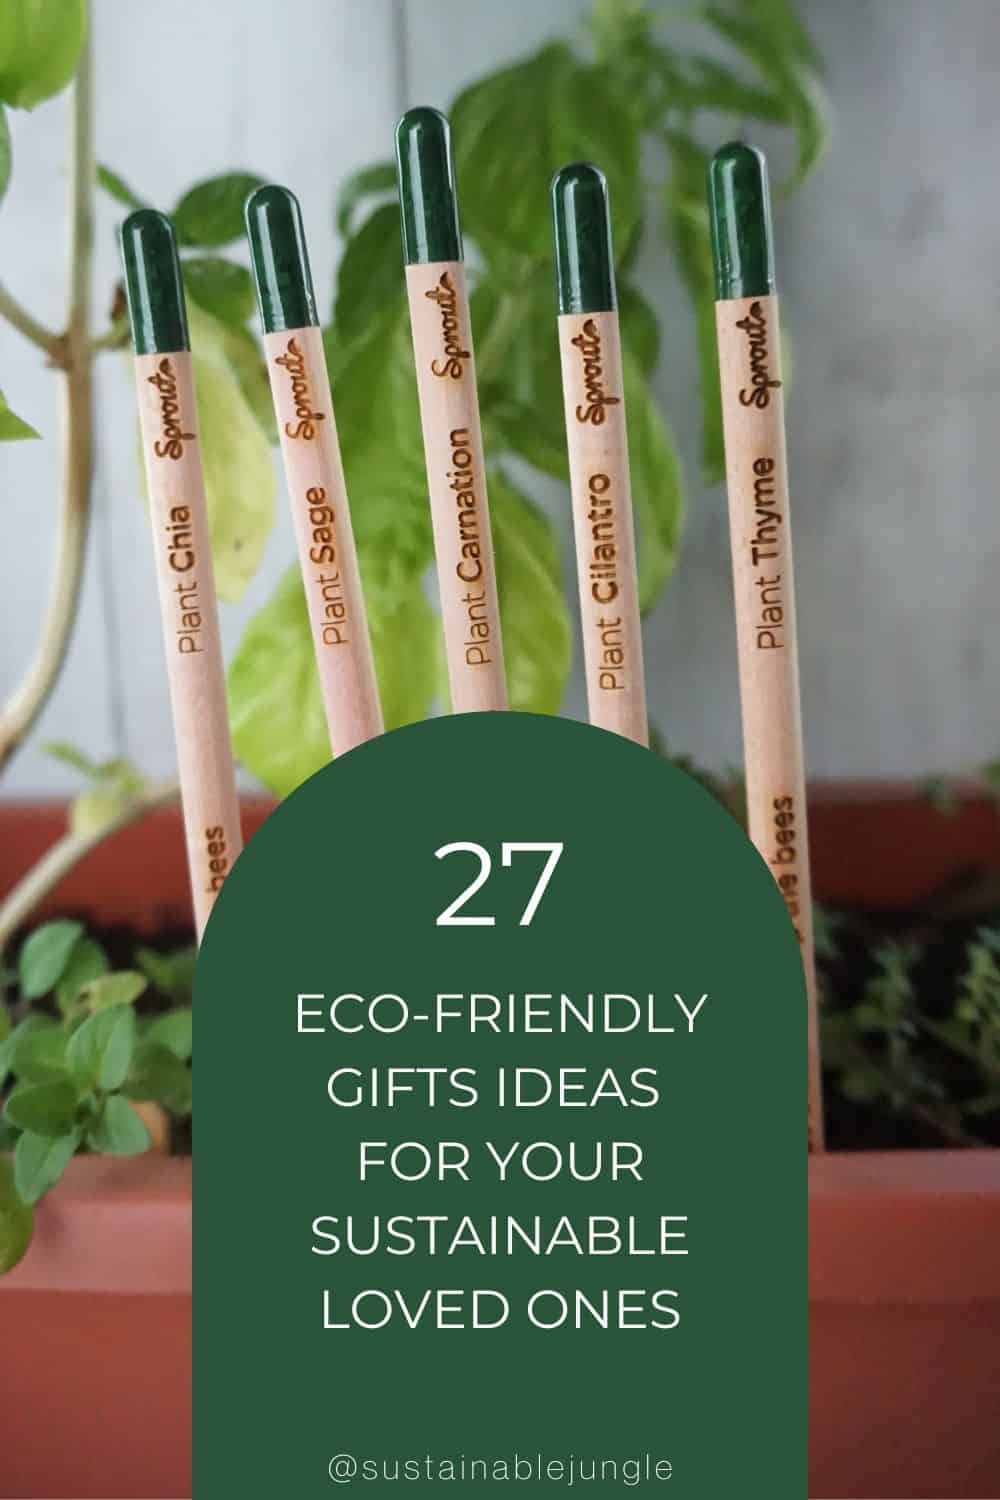 27 Eco-Friendly Gifts Ideas For Your Sustainable Loved Ones Image by Sustainable Jungle #ecofriendlygifts #ecofriendlygiftideas #ecofriendlyChristmasgifts #sustainablegifts #bestsustainablegifts #sustainablegiftsforChristmas #sustainablejungle